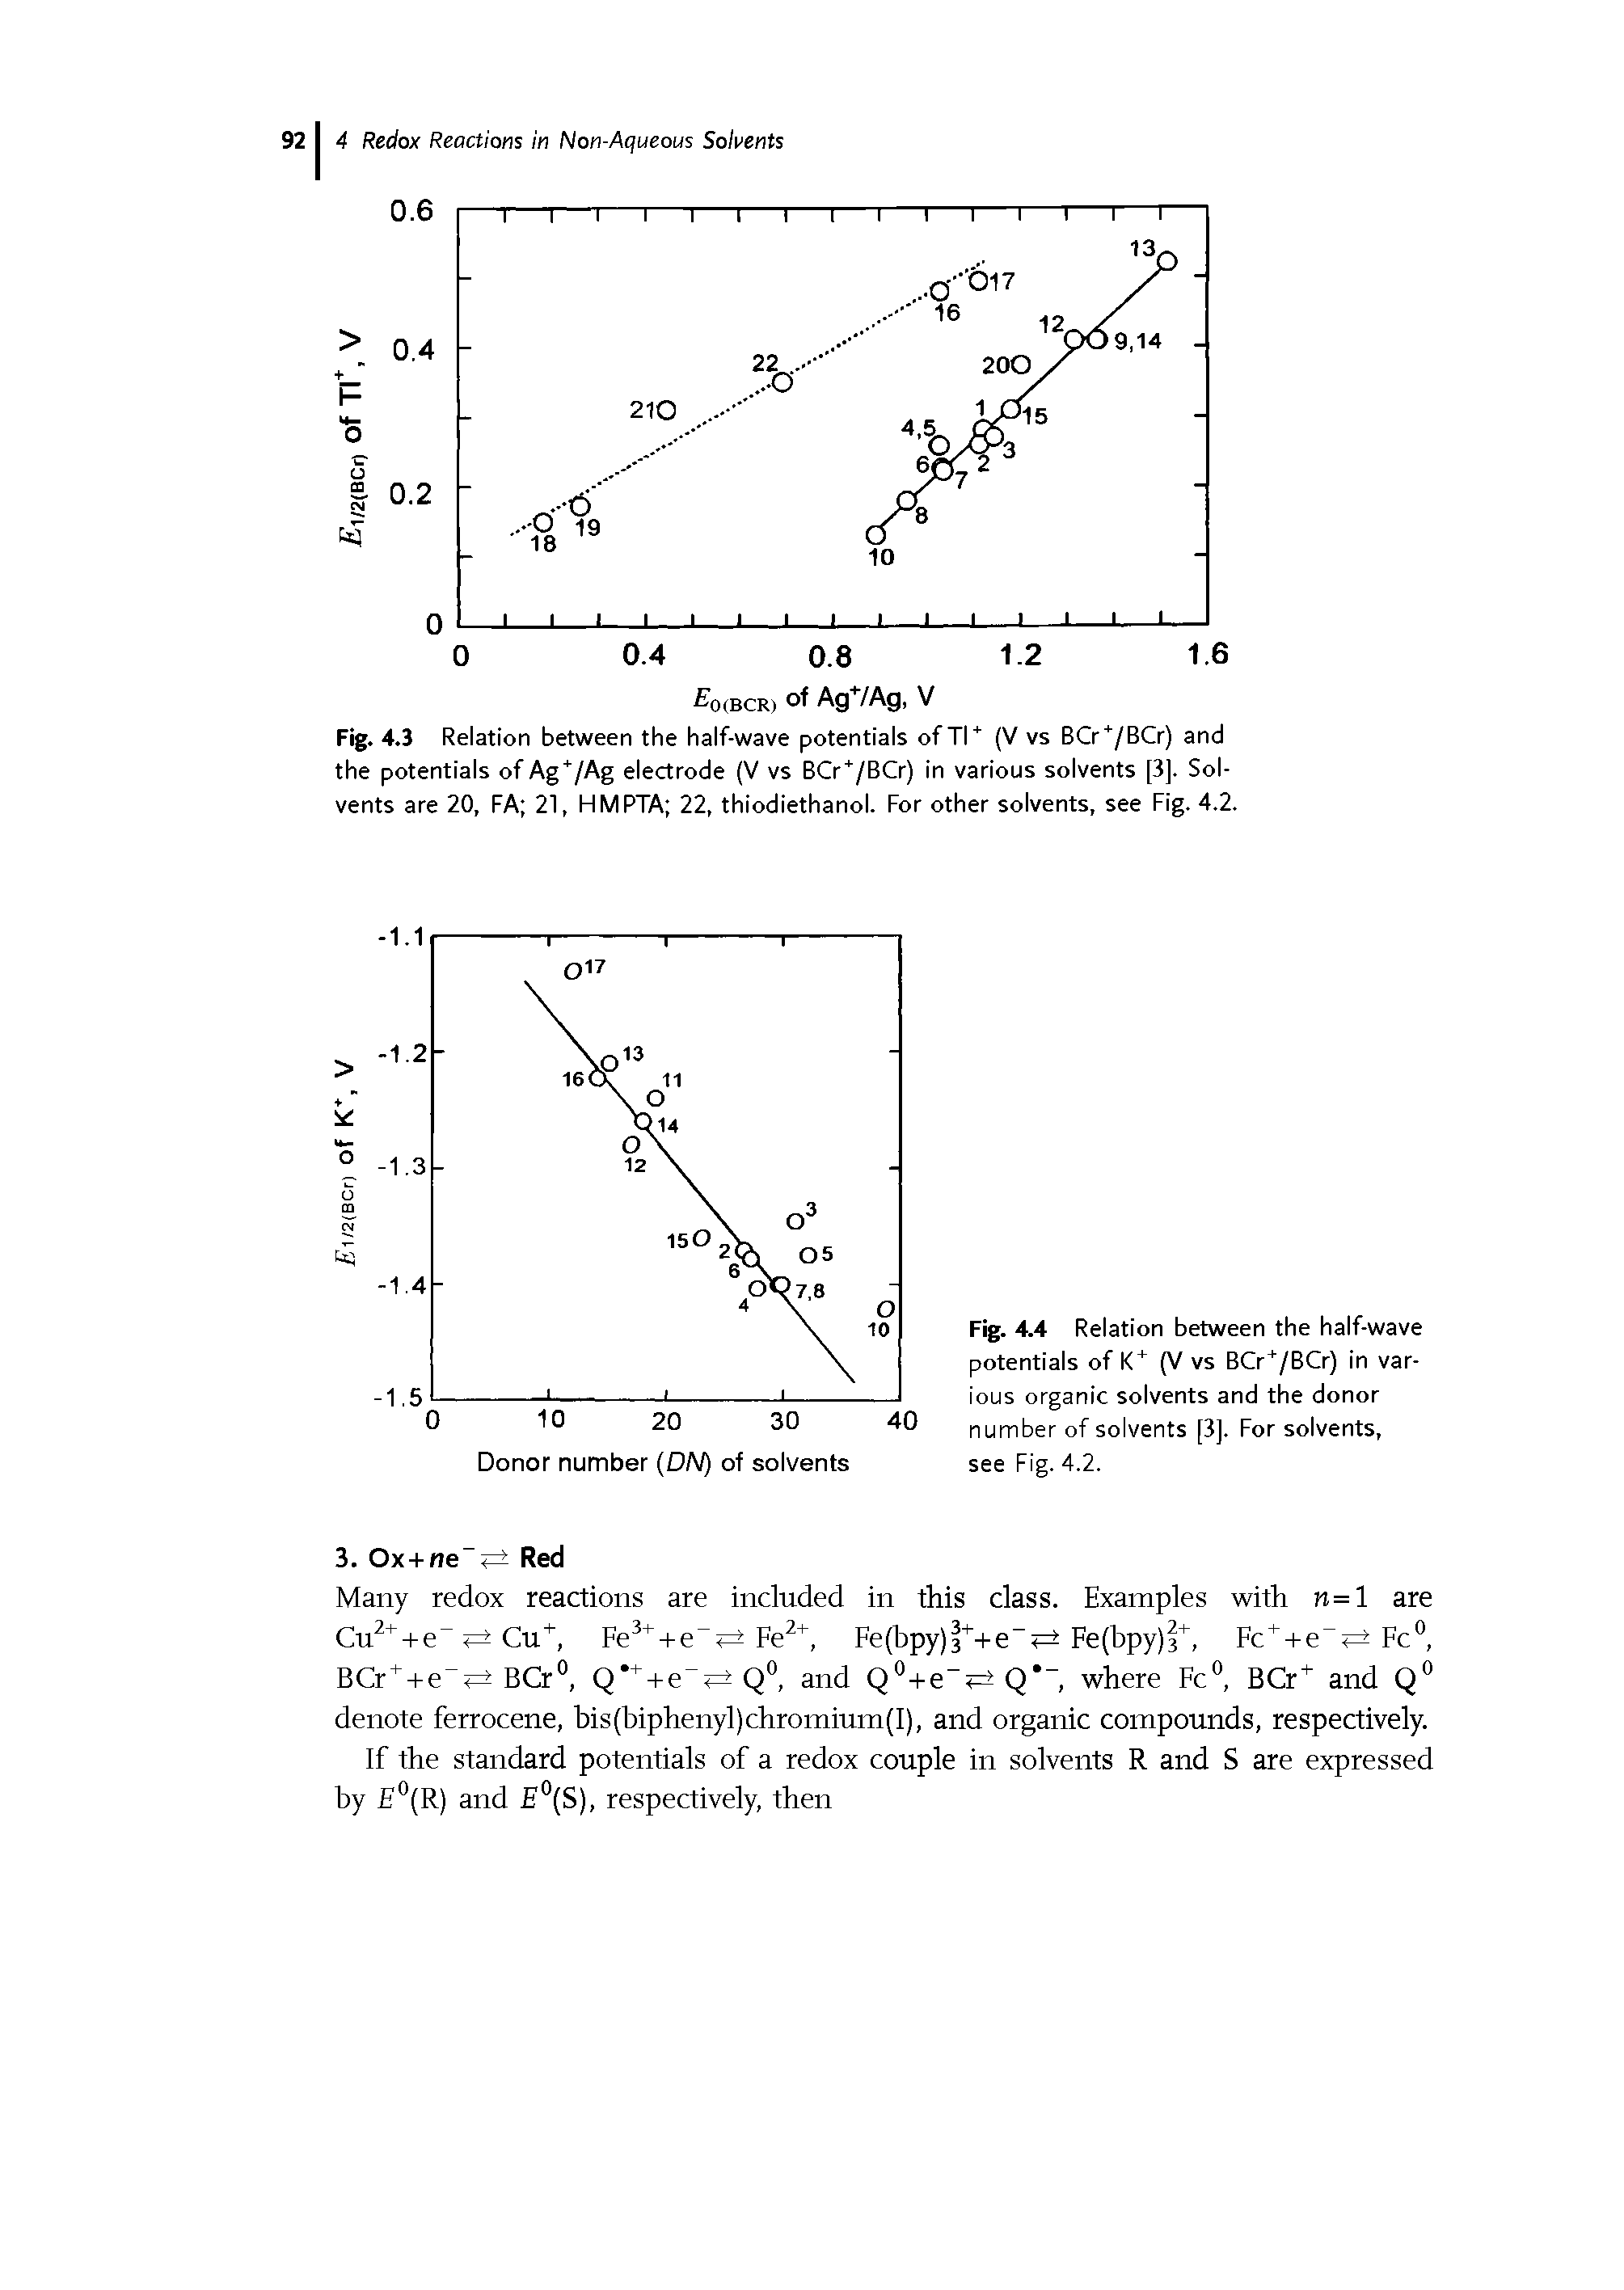 Fig. 4.4 Relation between the half-wave potentials of K+ (V vs BCr+/BCr) in various organic solvents and the donor number of solvents [3]. For solvents, see Fig. 4.2.